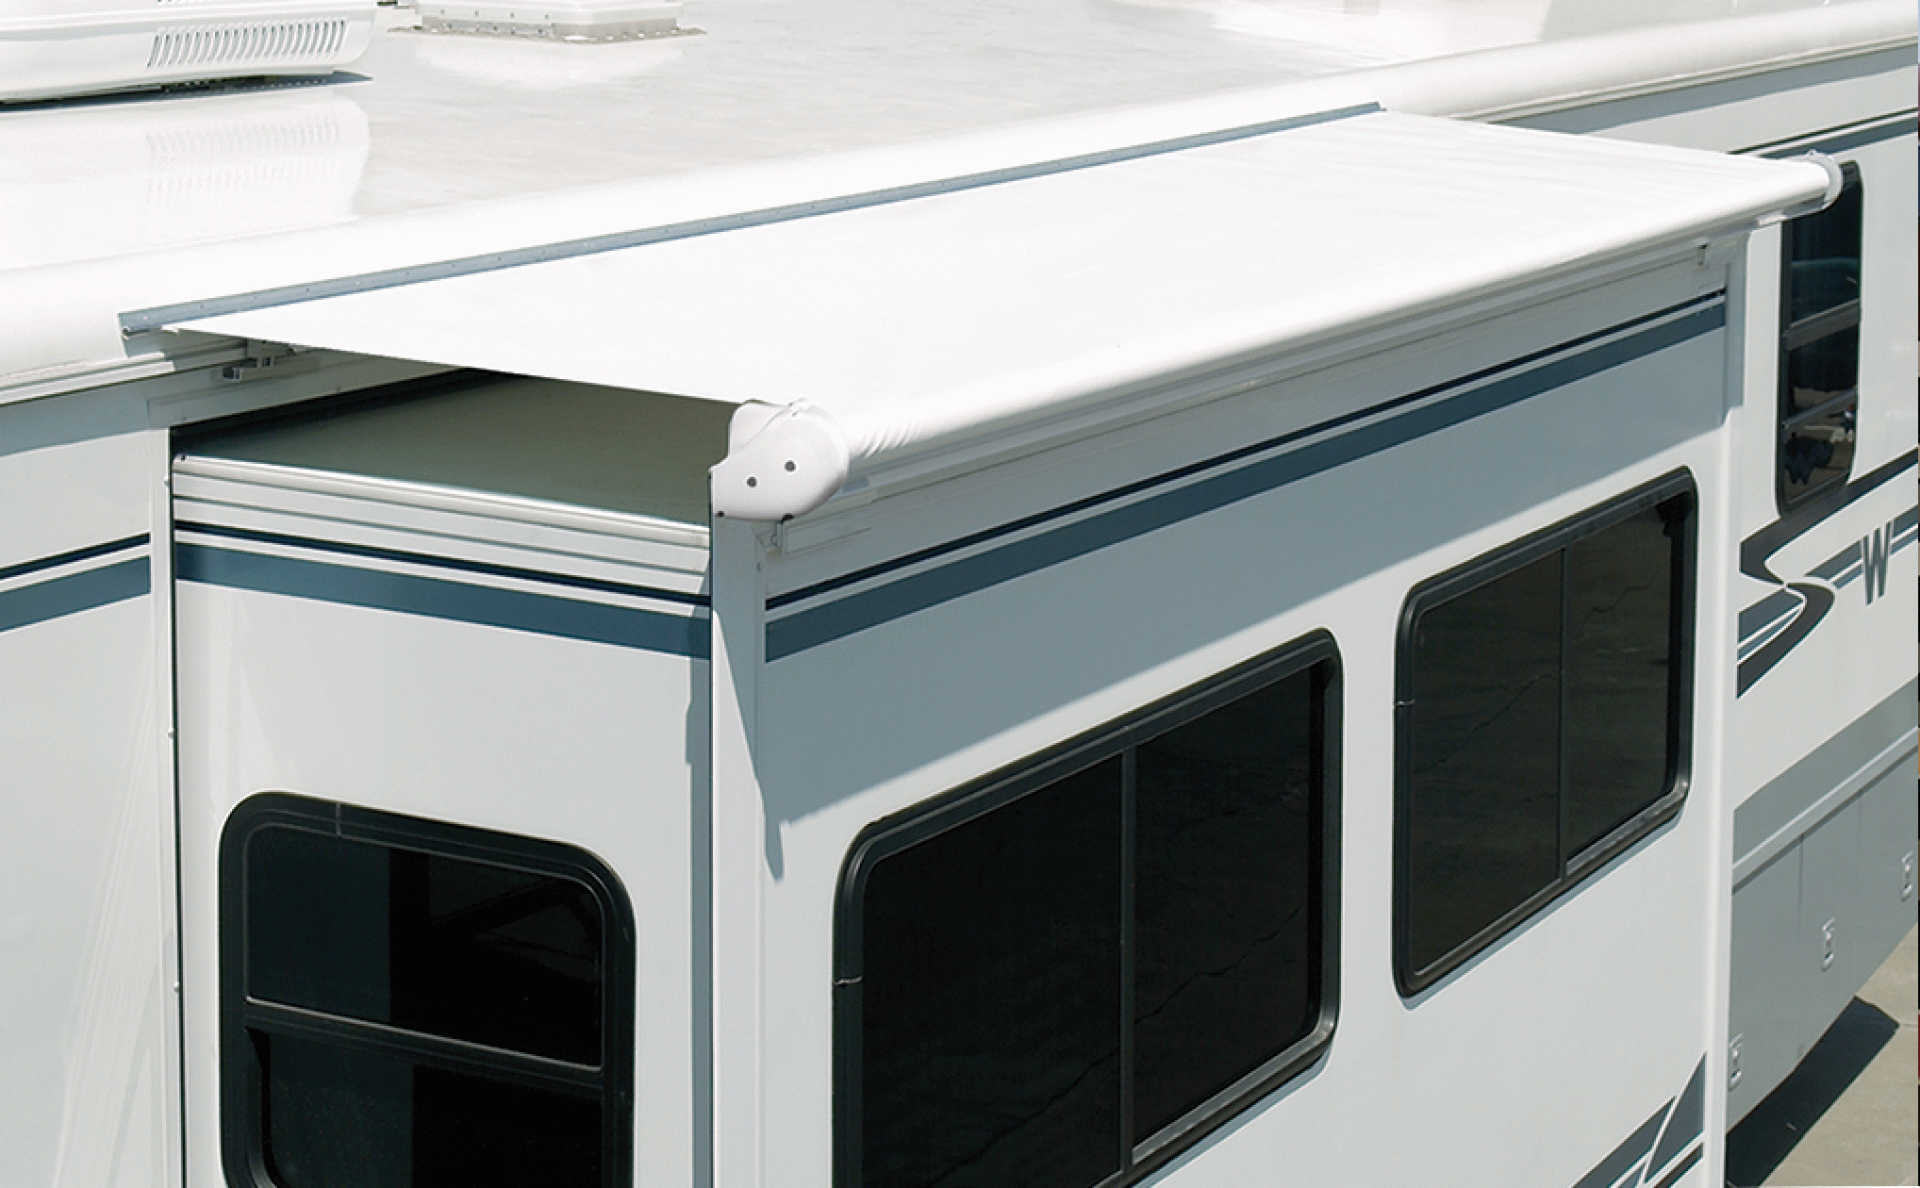 CAREFREE OF COLORADO | UQ1490025 | SIDEOUT KOVER III AWNING 142" - 149" ROOF RANGE WHITE VINYL FABRIC & DEFLECTOR